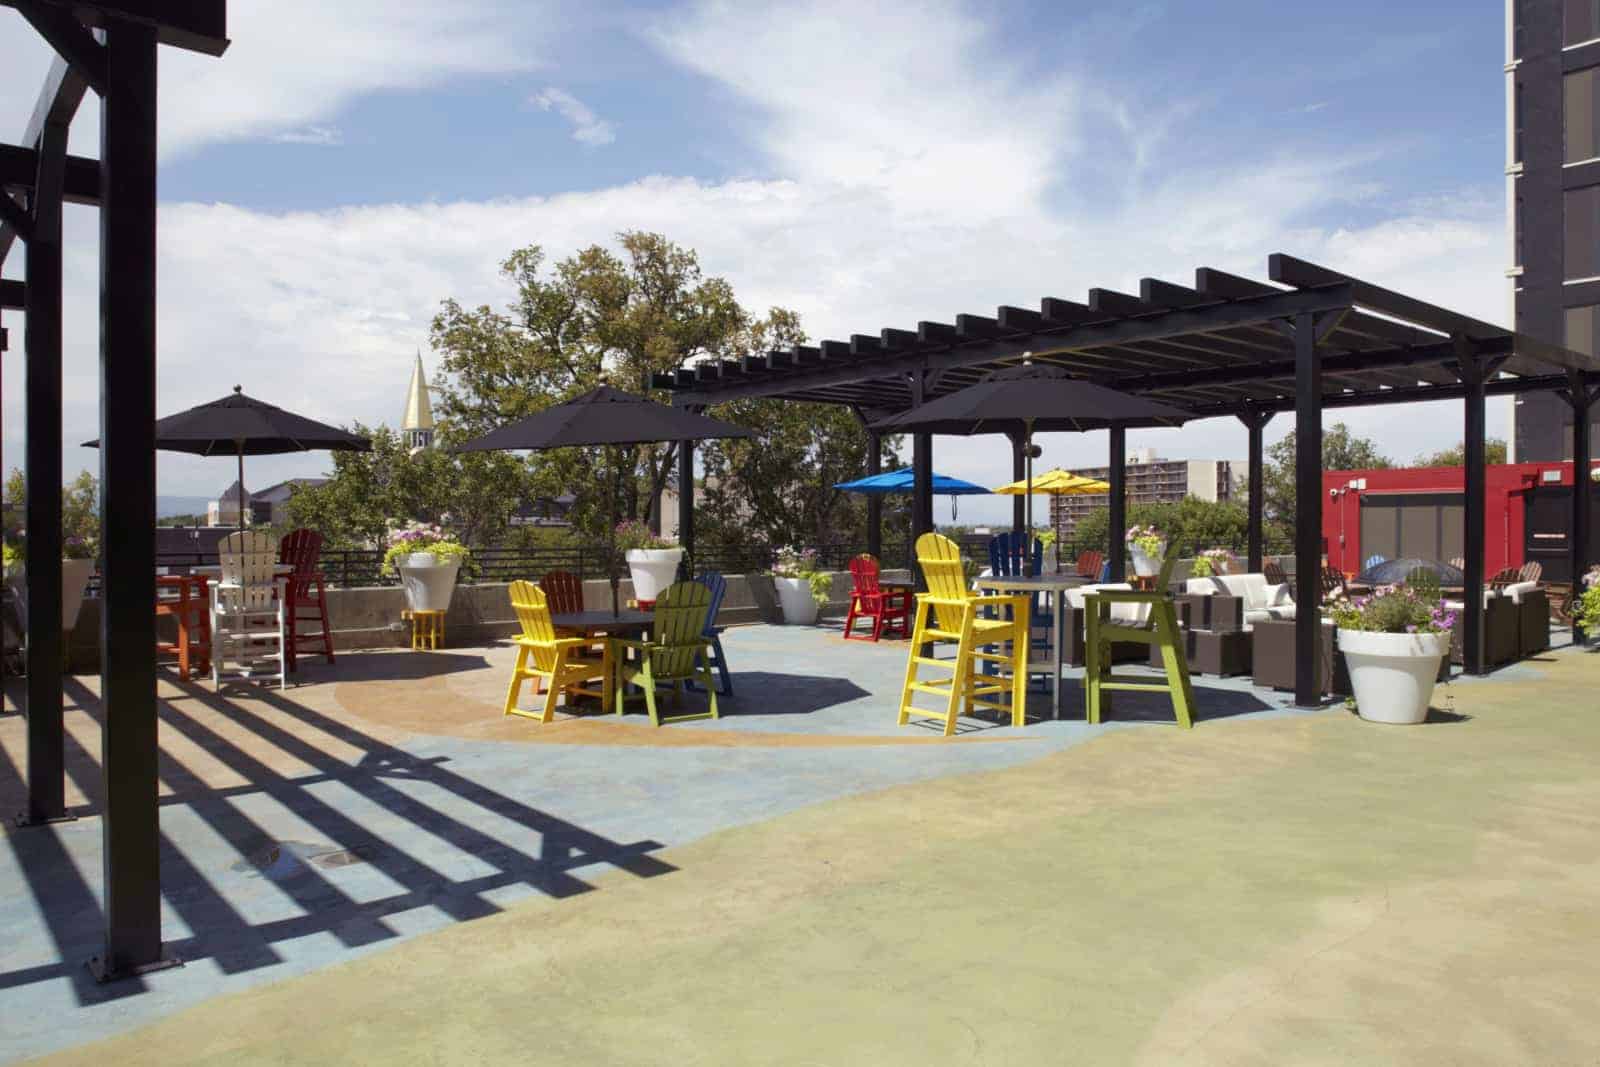 Roofdeck with adirondack chairs and barstools, couches, tables, umbrellas, and trellis.